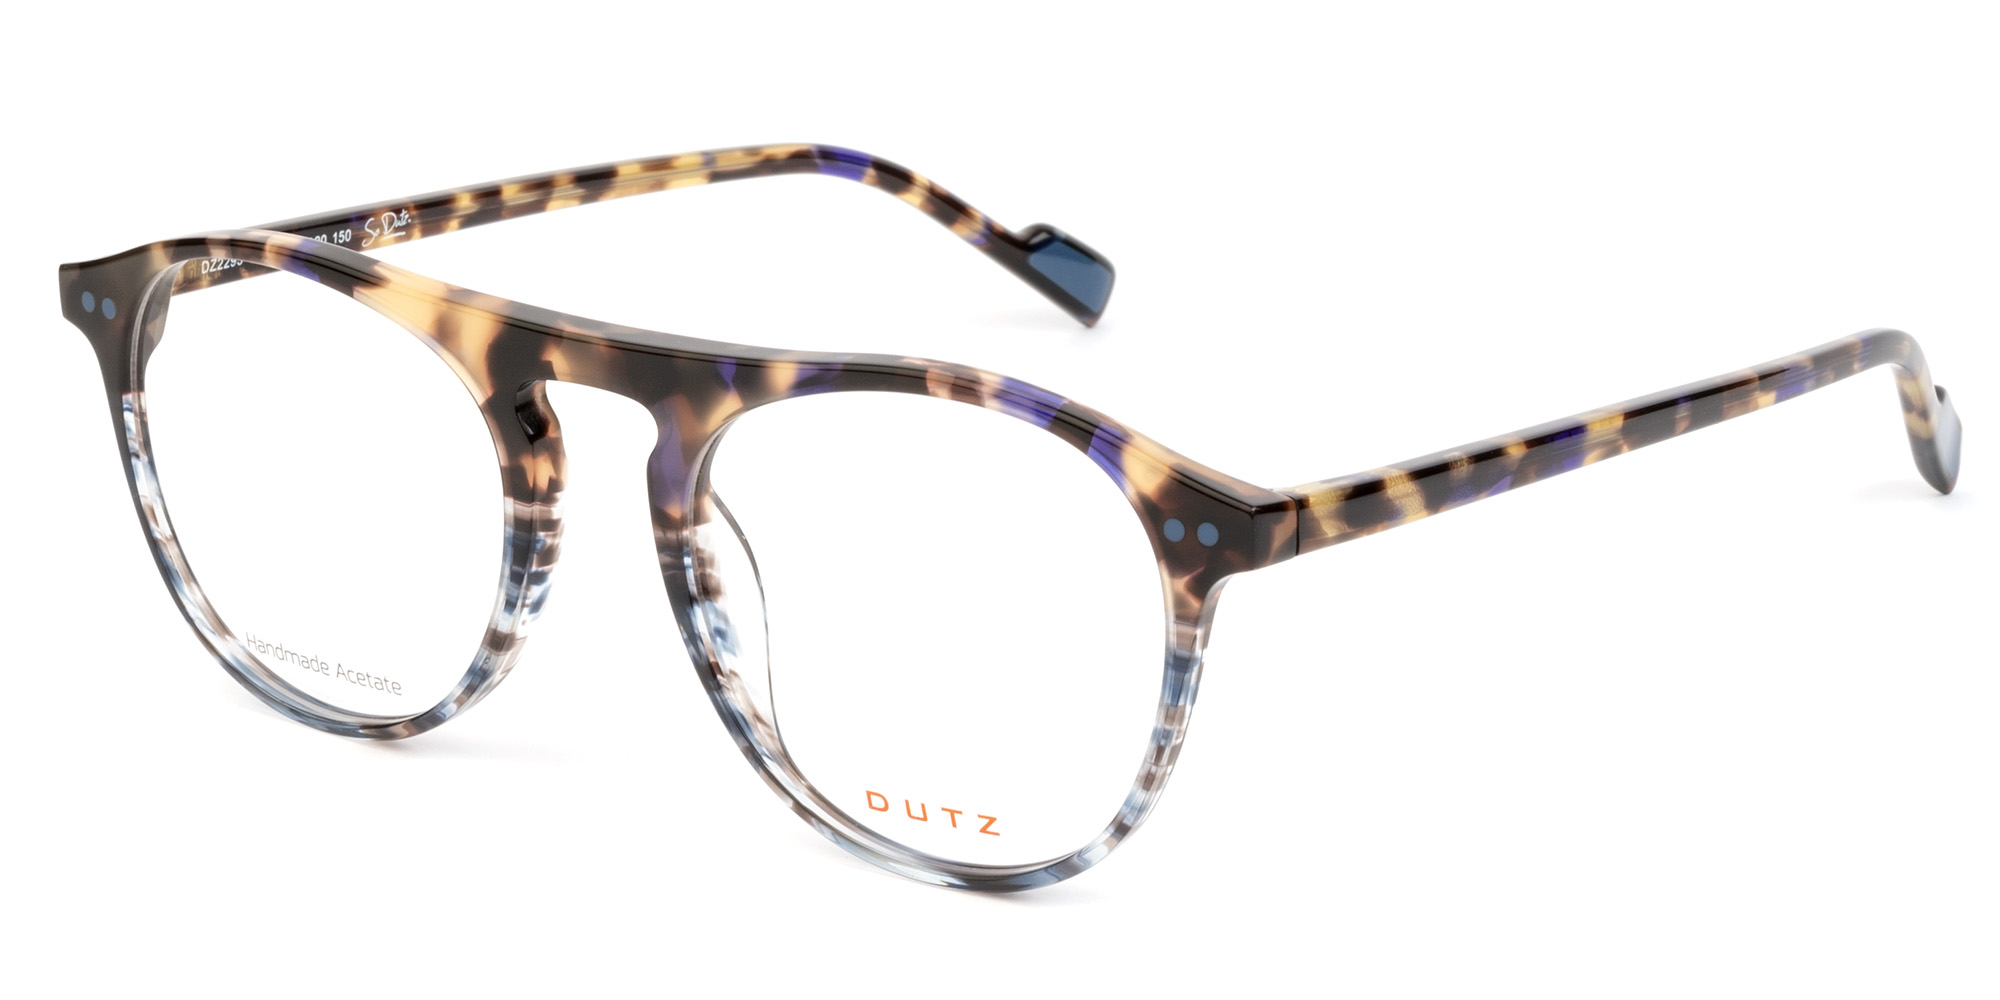 Multicolor, blue-brown based acetate frame and matching color temples